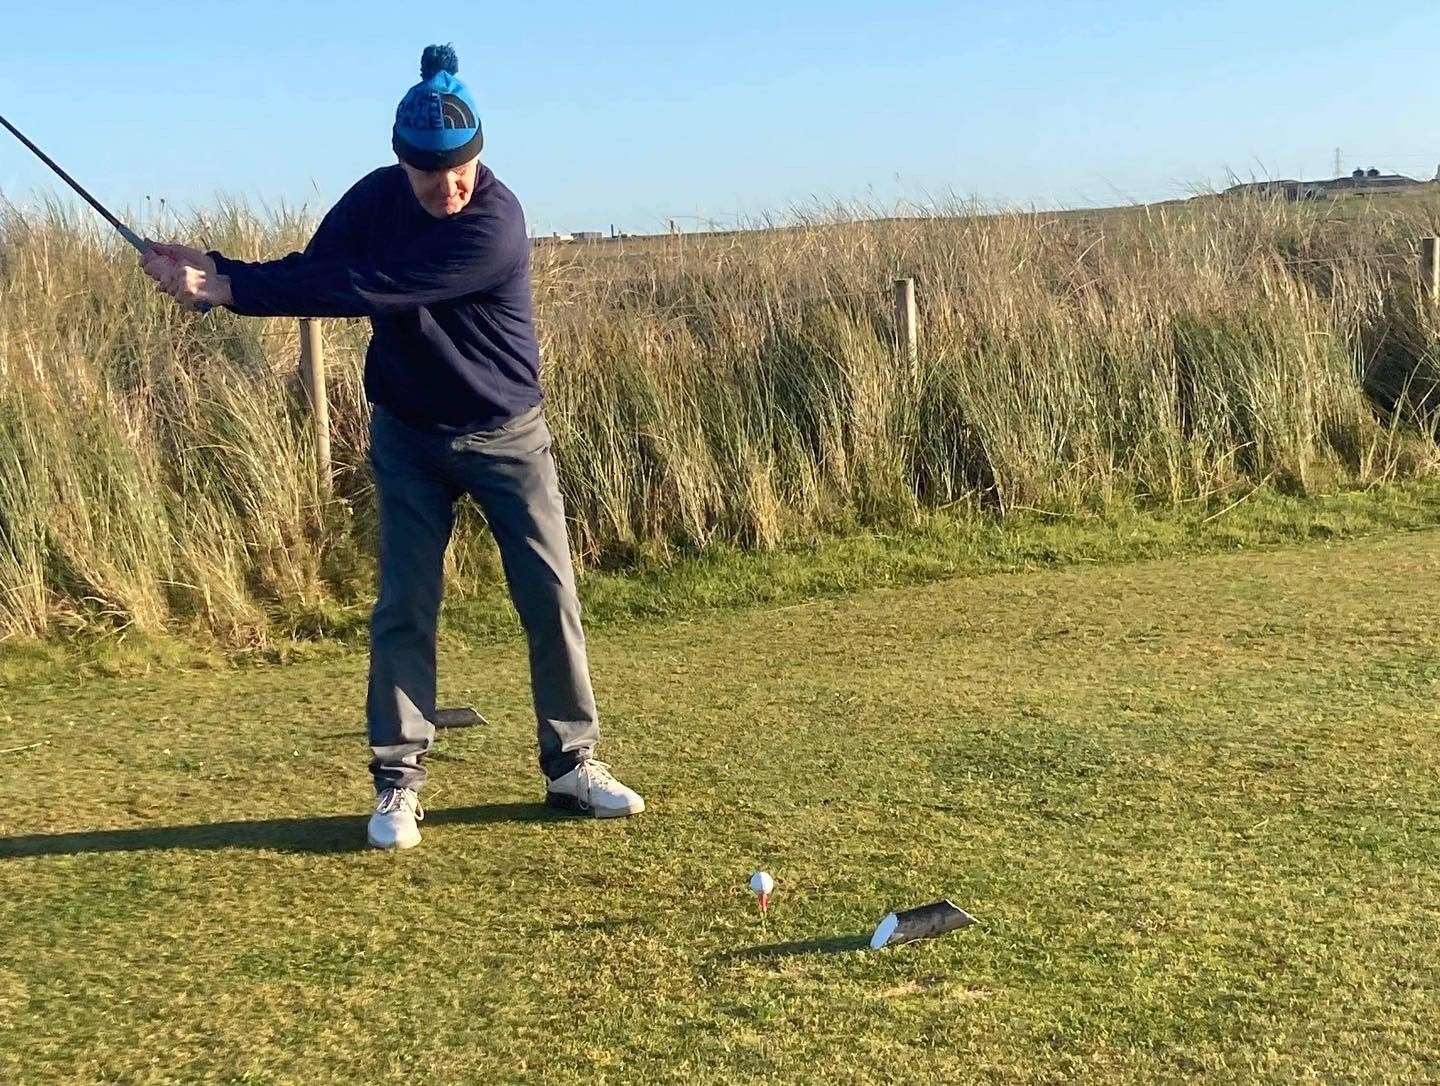 John O’Brien, winner of the latest round of the gents' winter league Stableford competition, teeing off at the sixth hole.